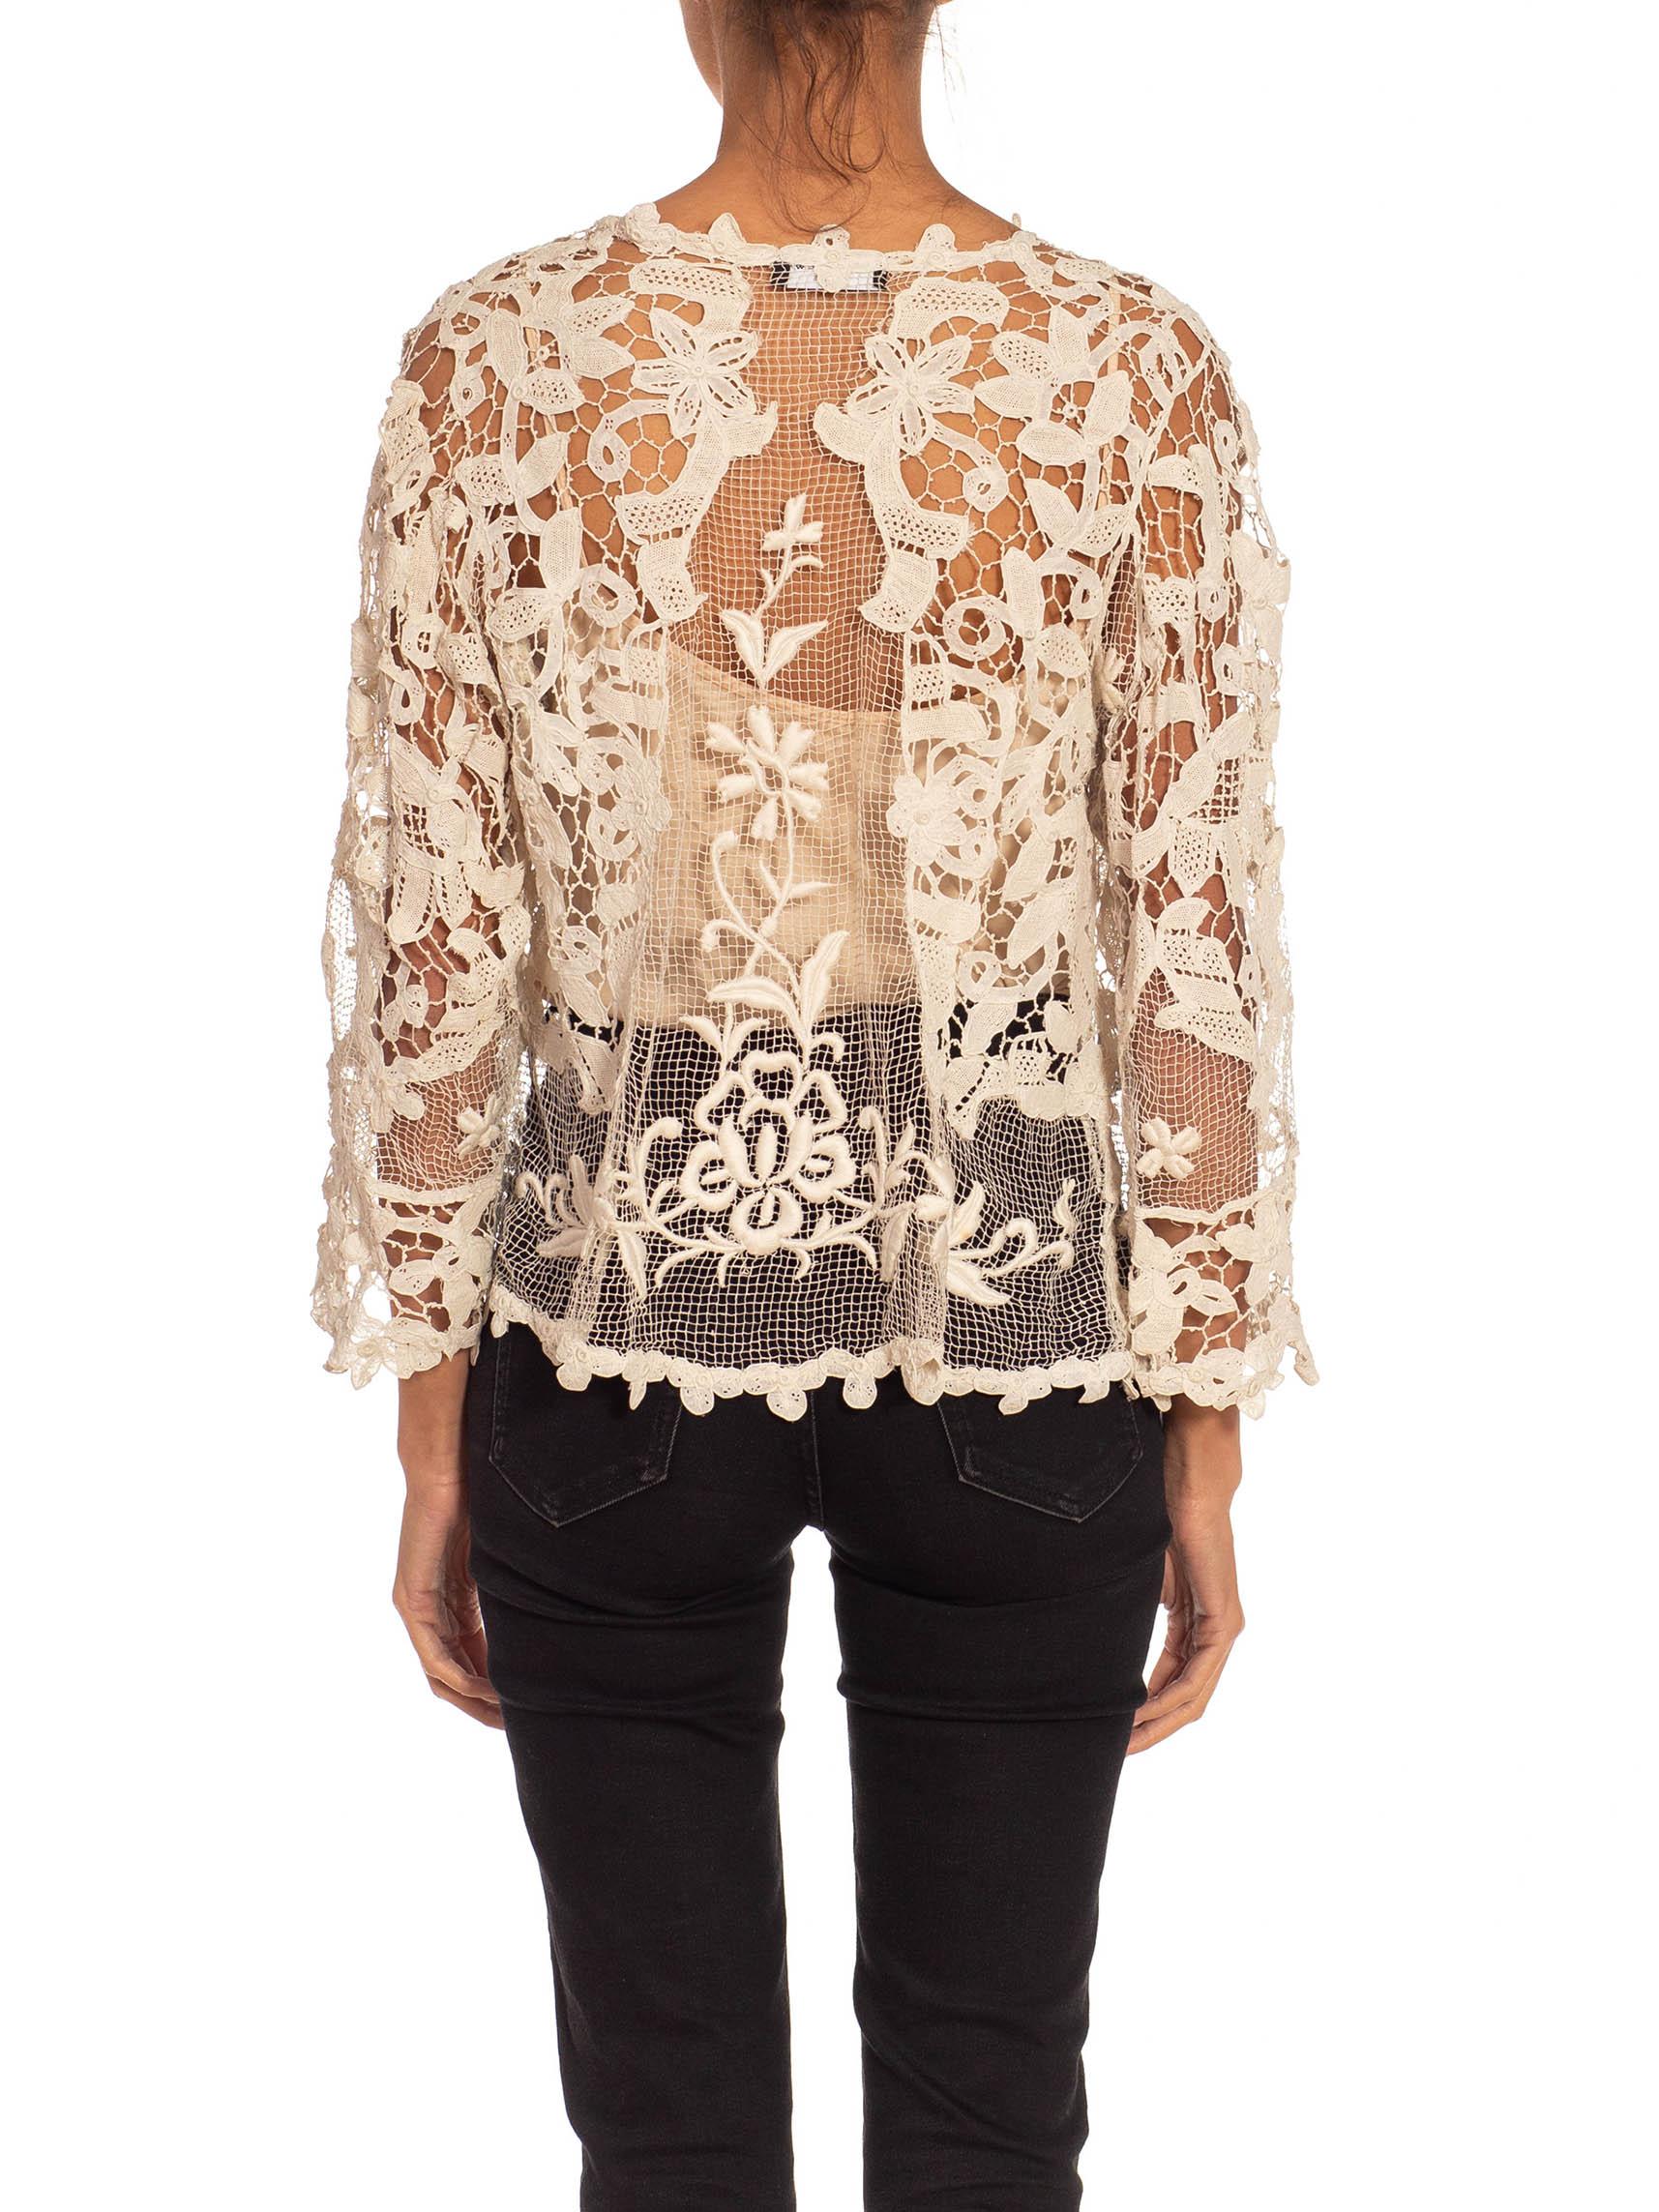 Victorian Off White Needle Lace Long Sleeve Jacket With Flower Hooks For Sale 1